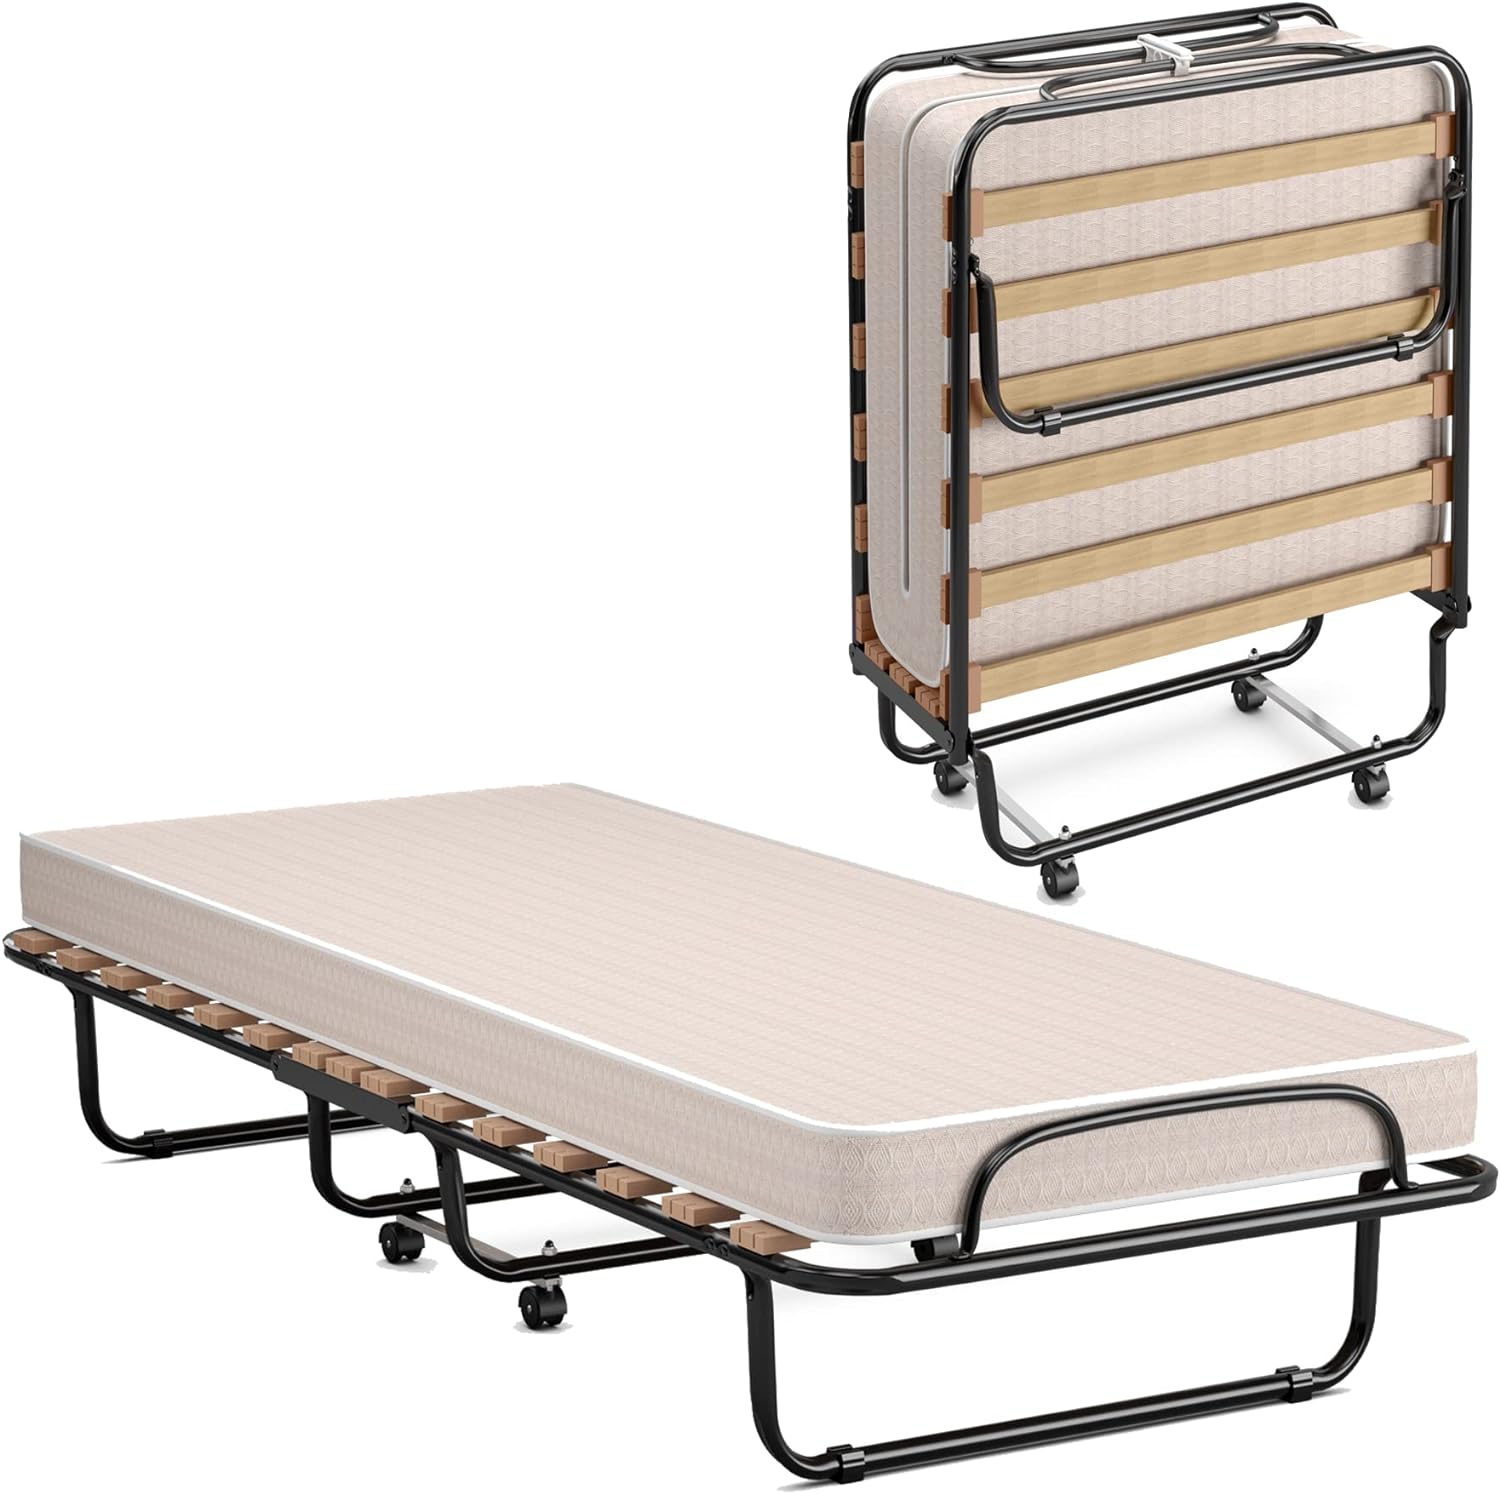 KOMFOTT Folding Rollaway Bed with Mattress, Foldable Bed with Memory Foam Mattress for Adults, Portable Fold Up Guest Bed with Sturdy Steel Frame on Wheels for Home & Office, Made in Italy (Beige)